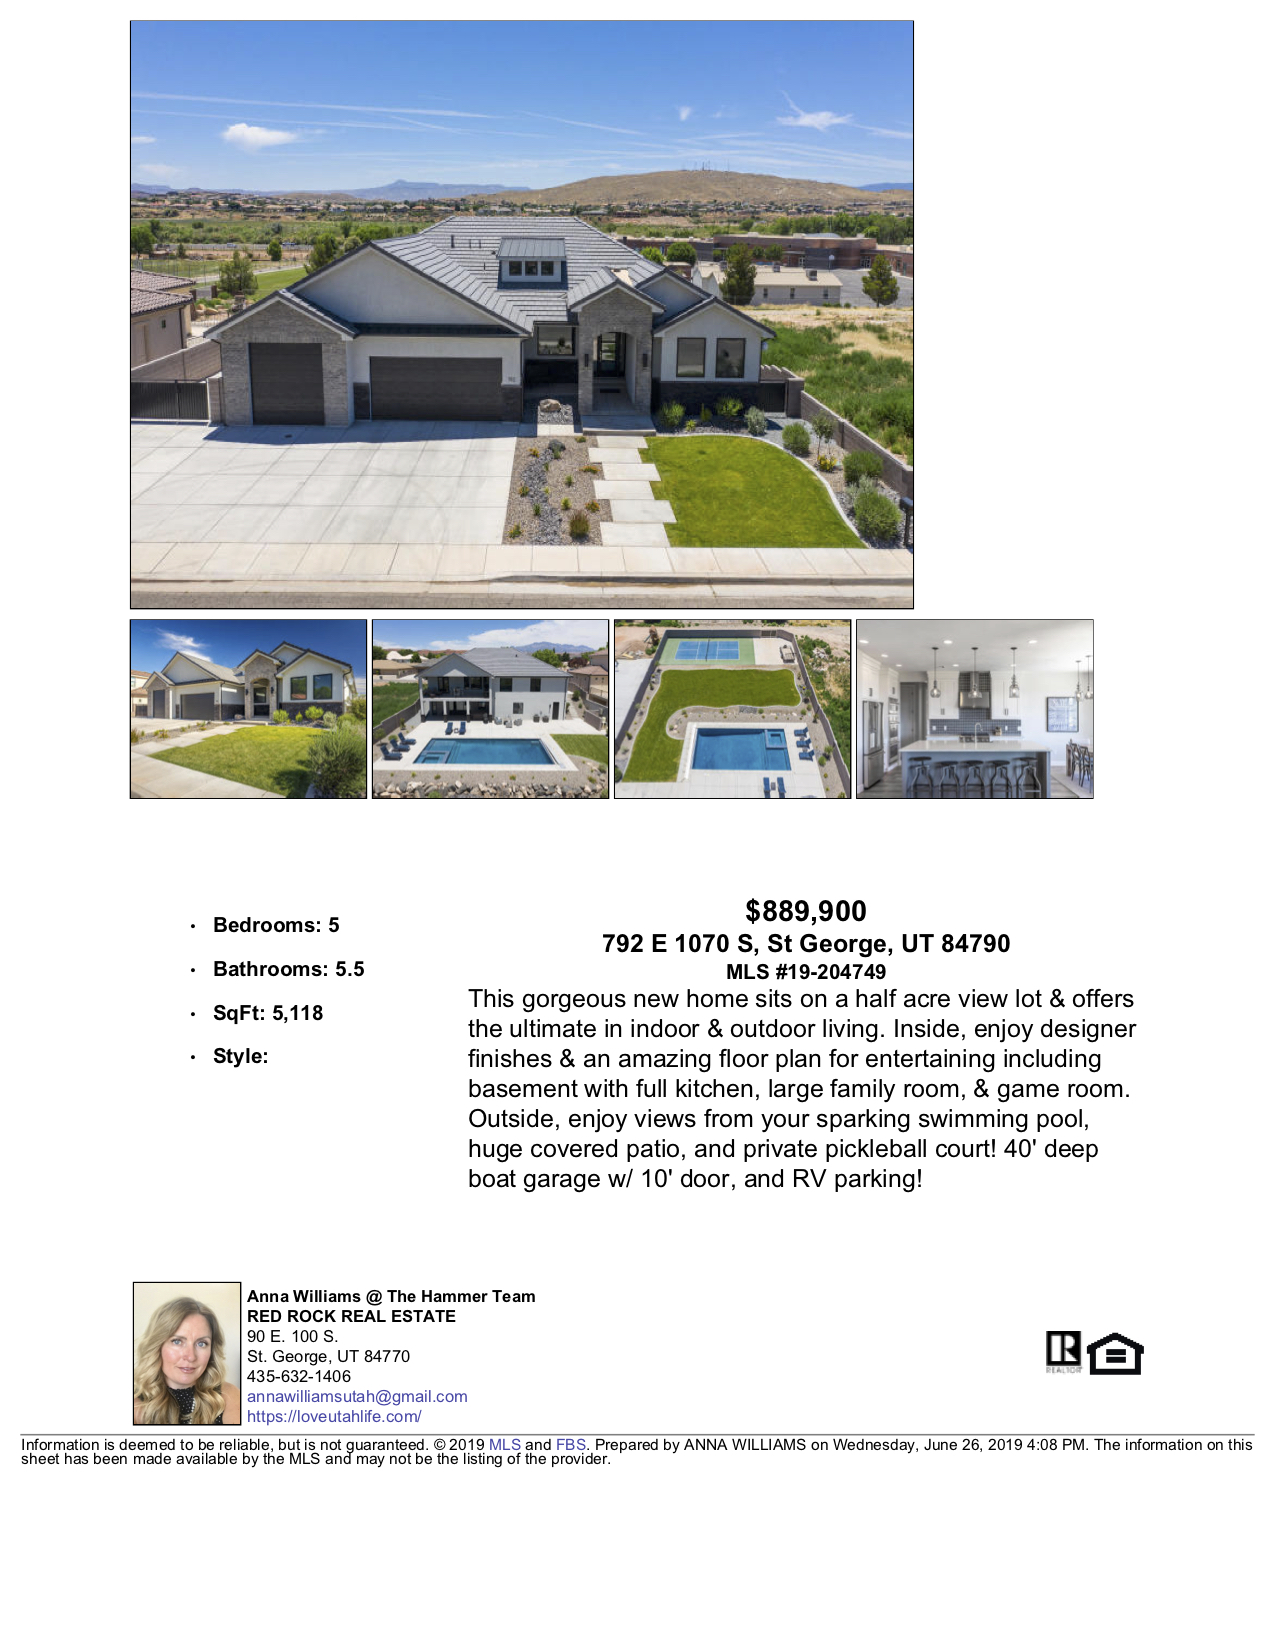 St. George luxury Home for sale